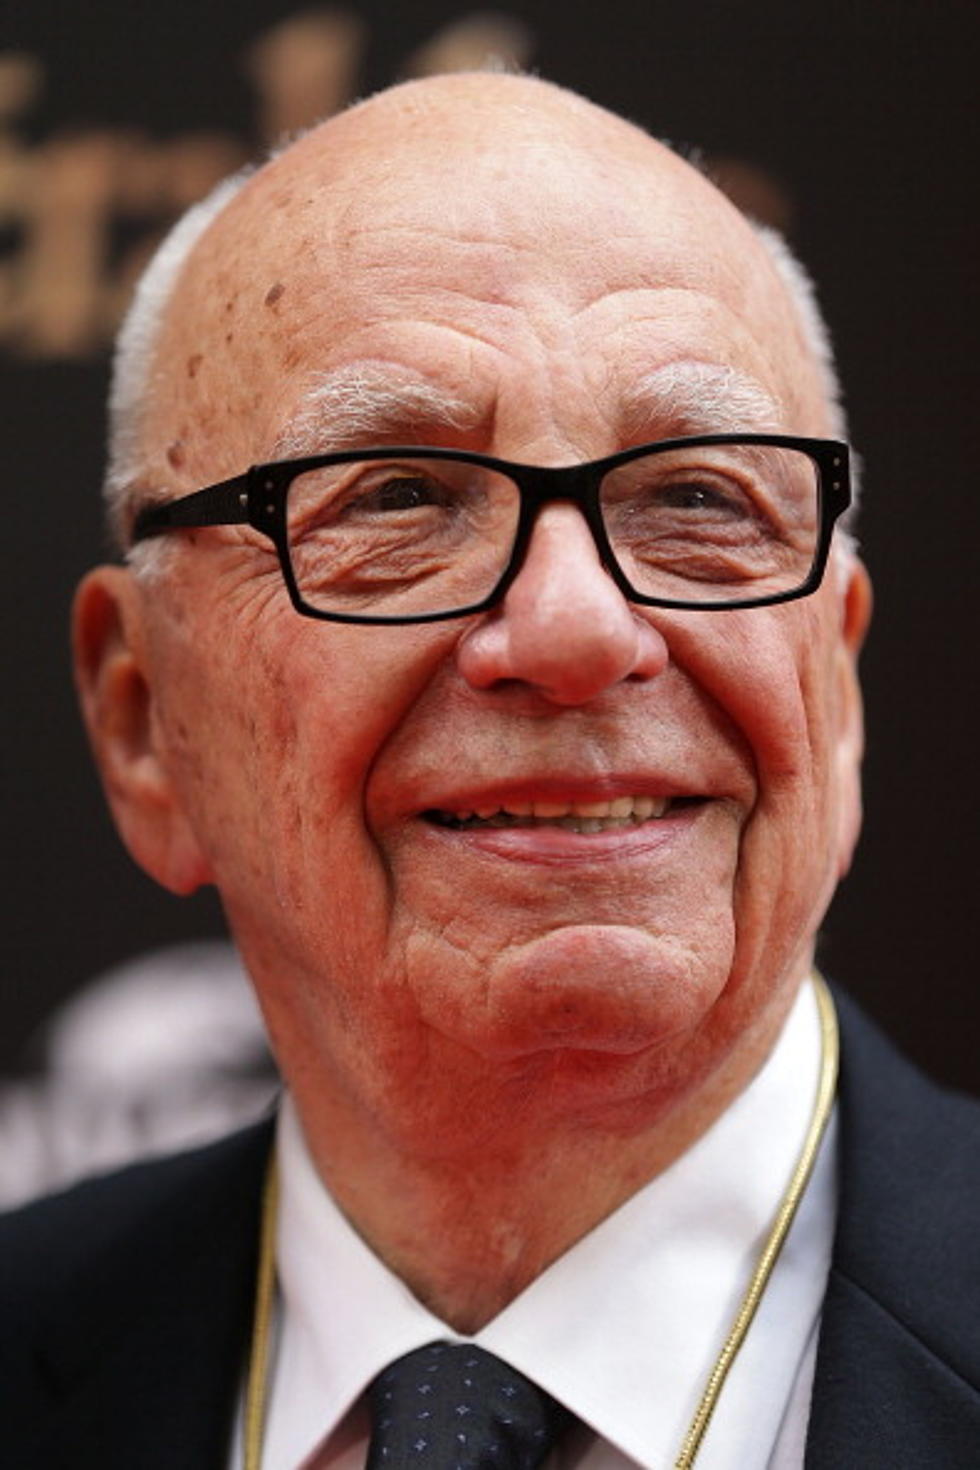 UK Lawmakers To Ask Murdoch To Come For Questions